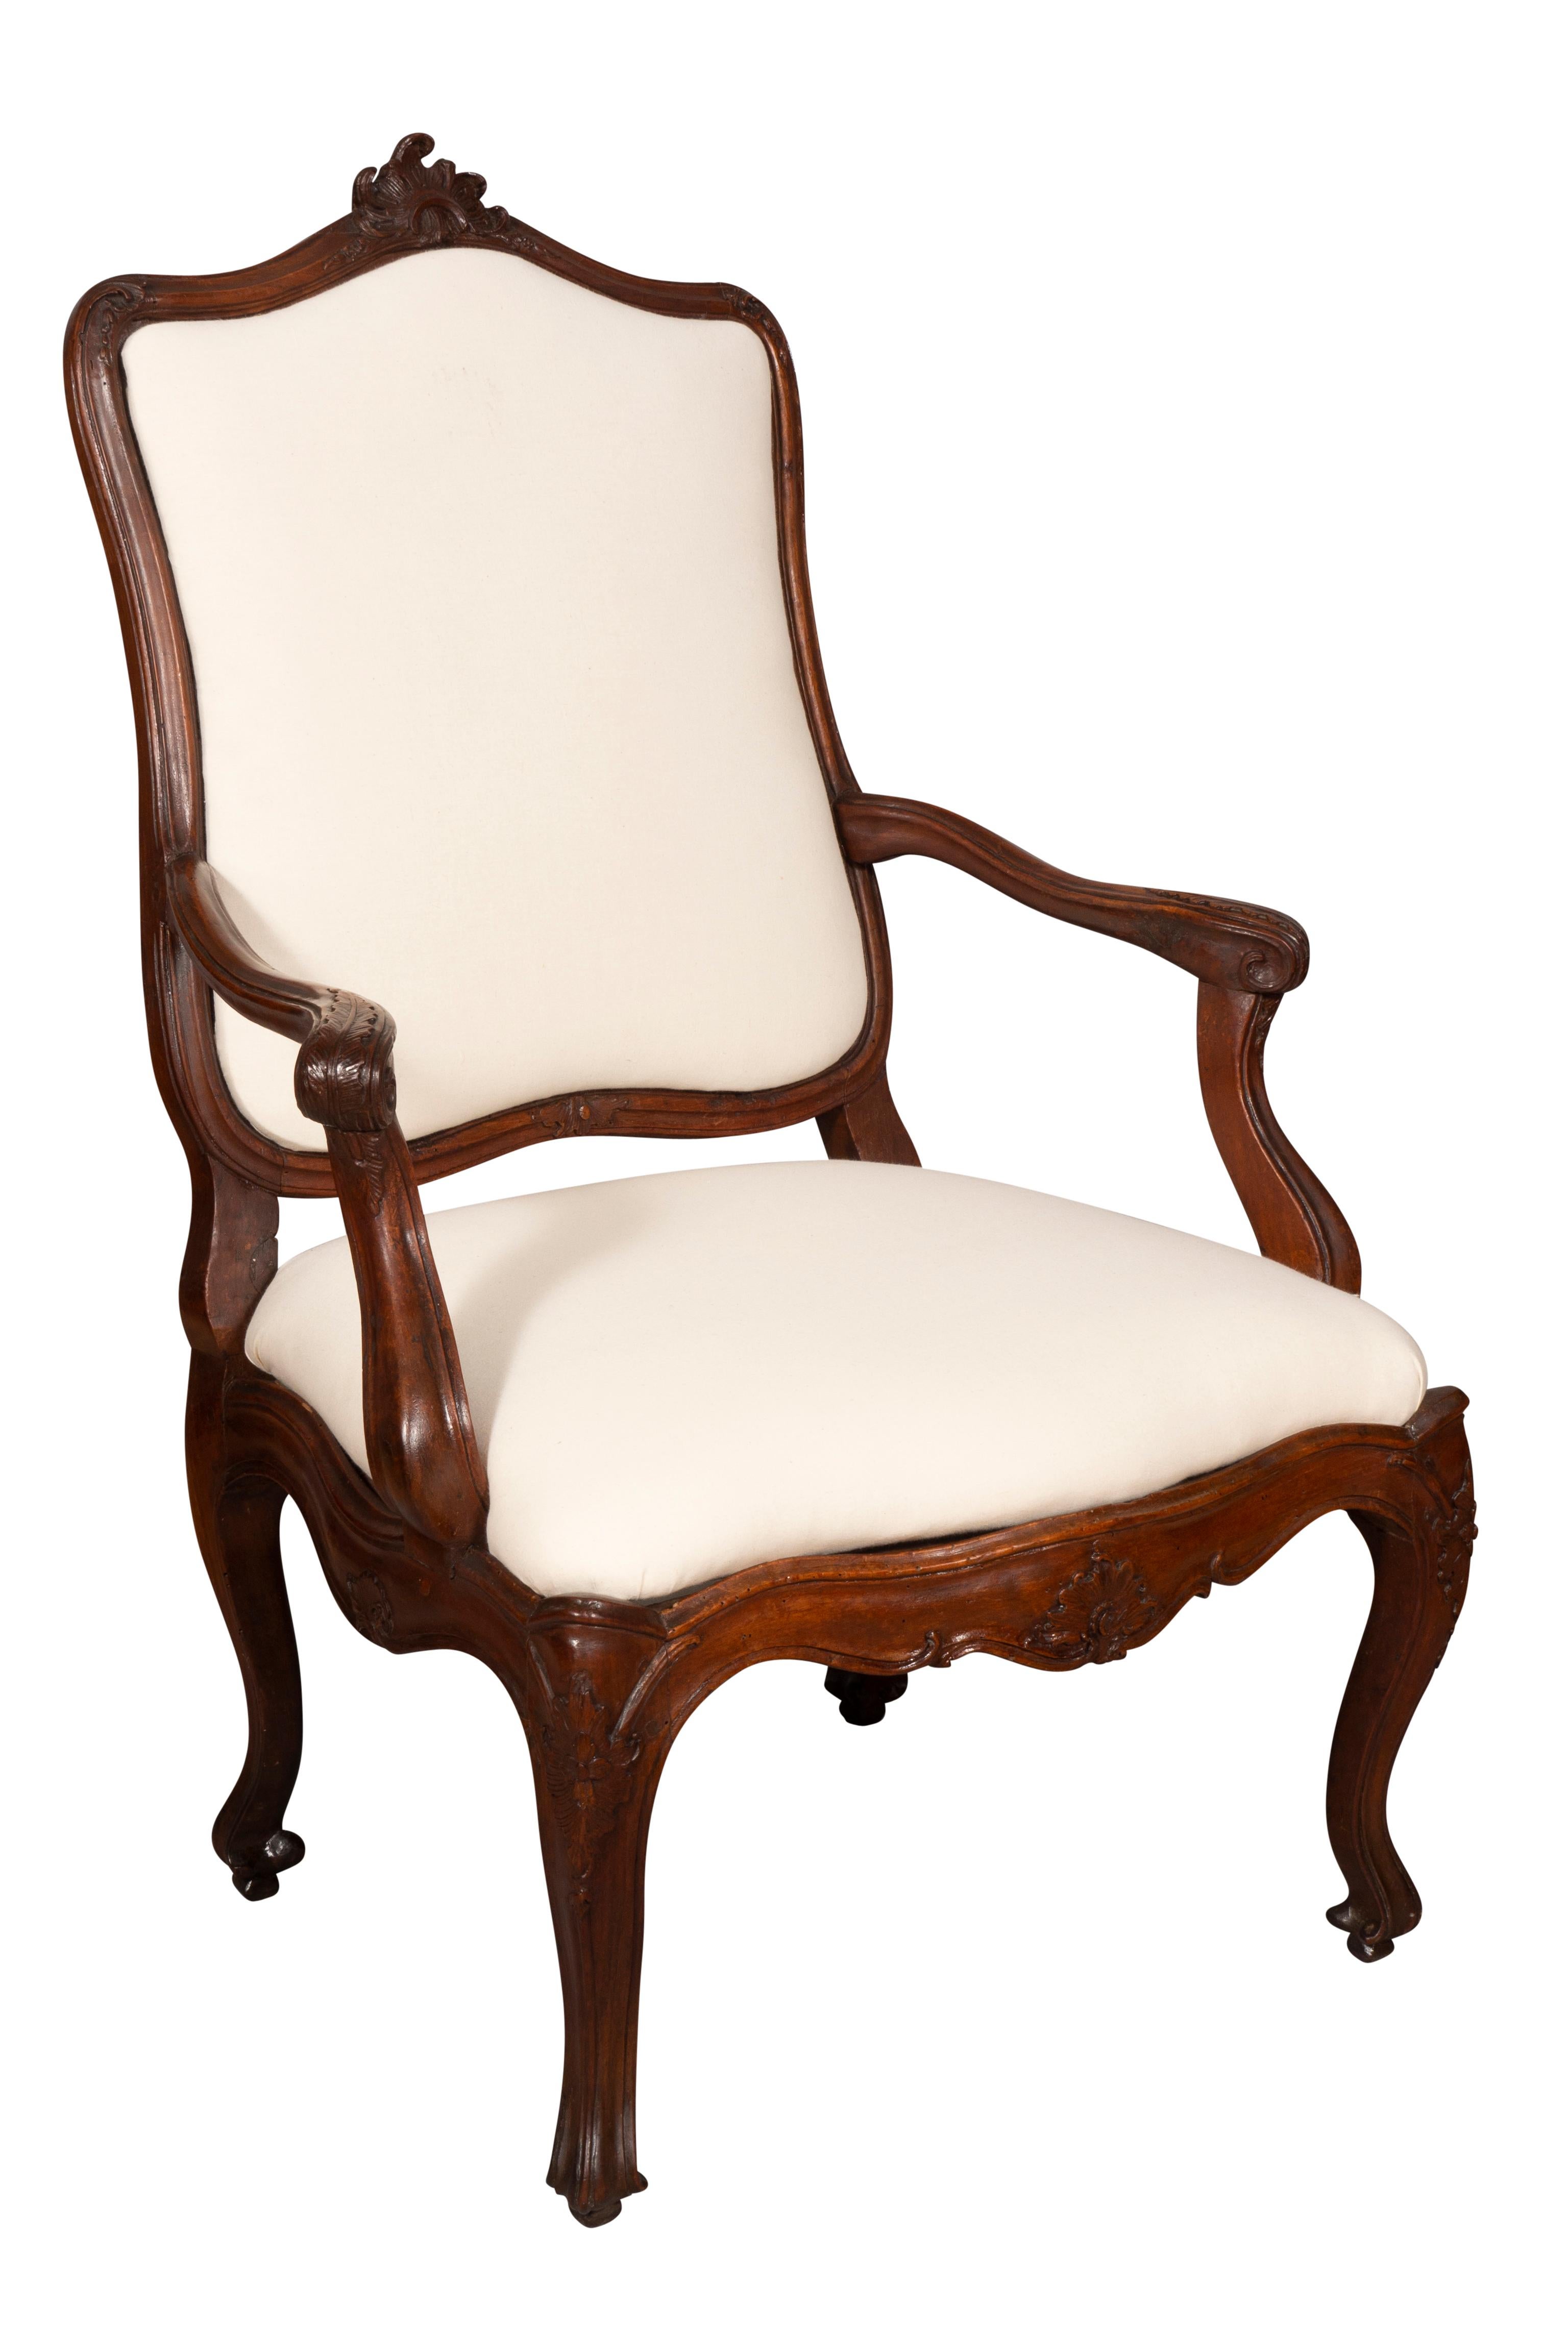 Pair of Italian Rococo Walnut Armchairs In Good Condition For Sale In Essex, MA